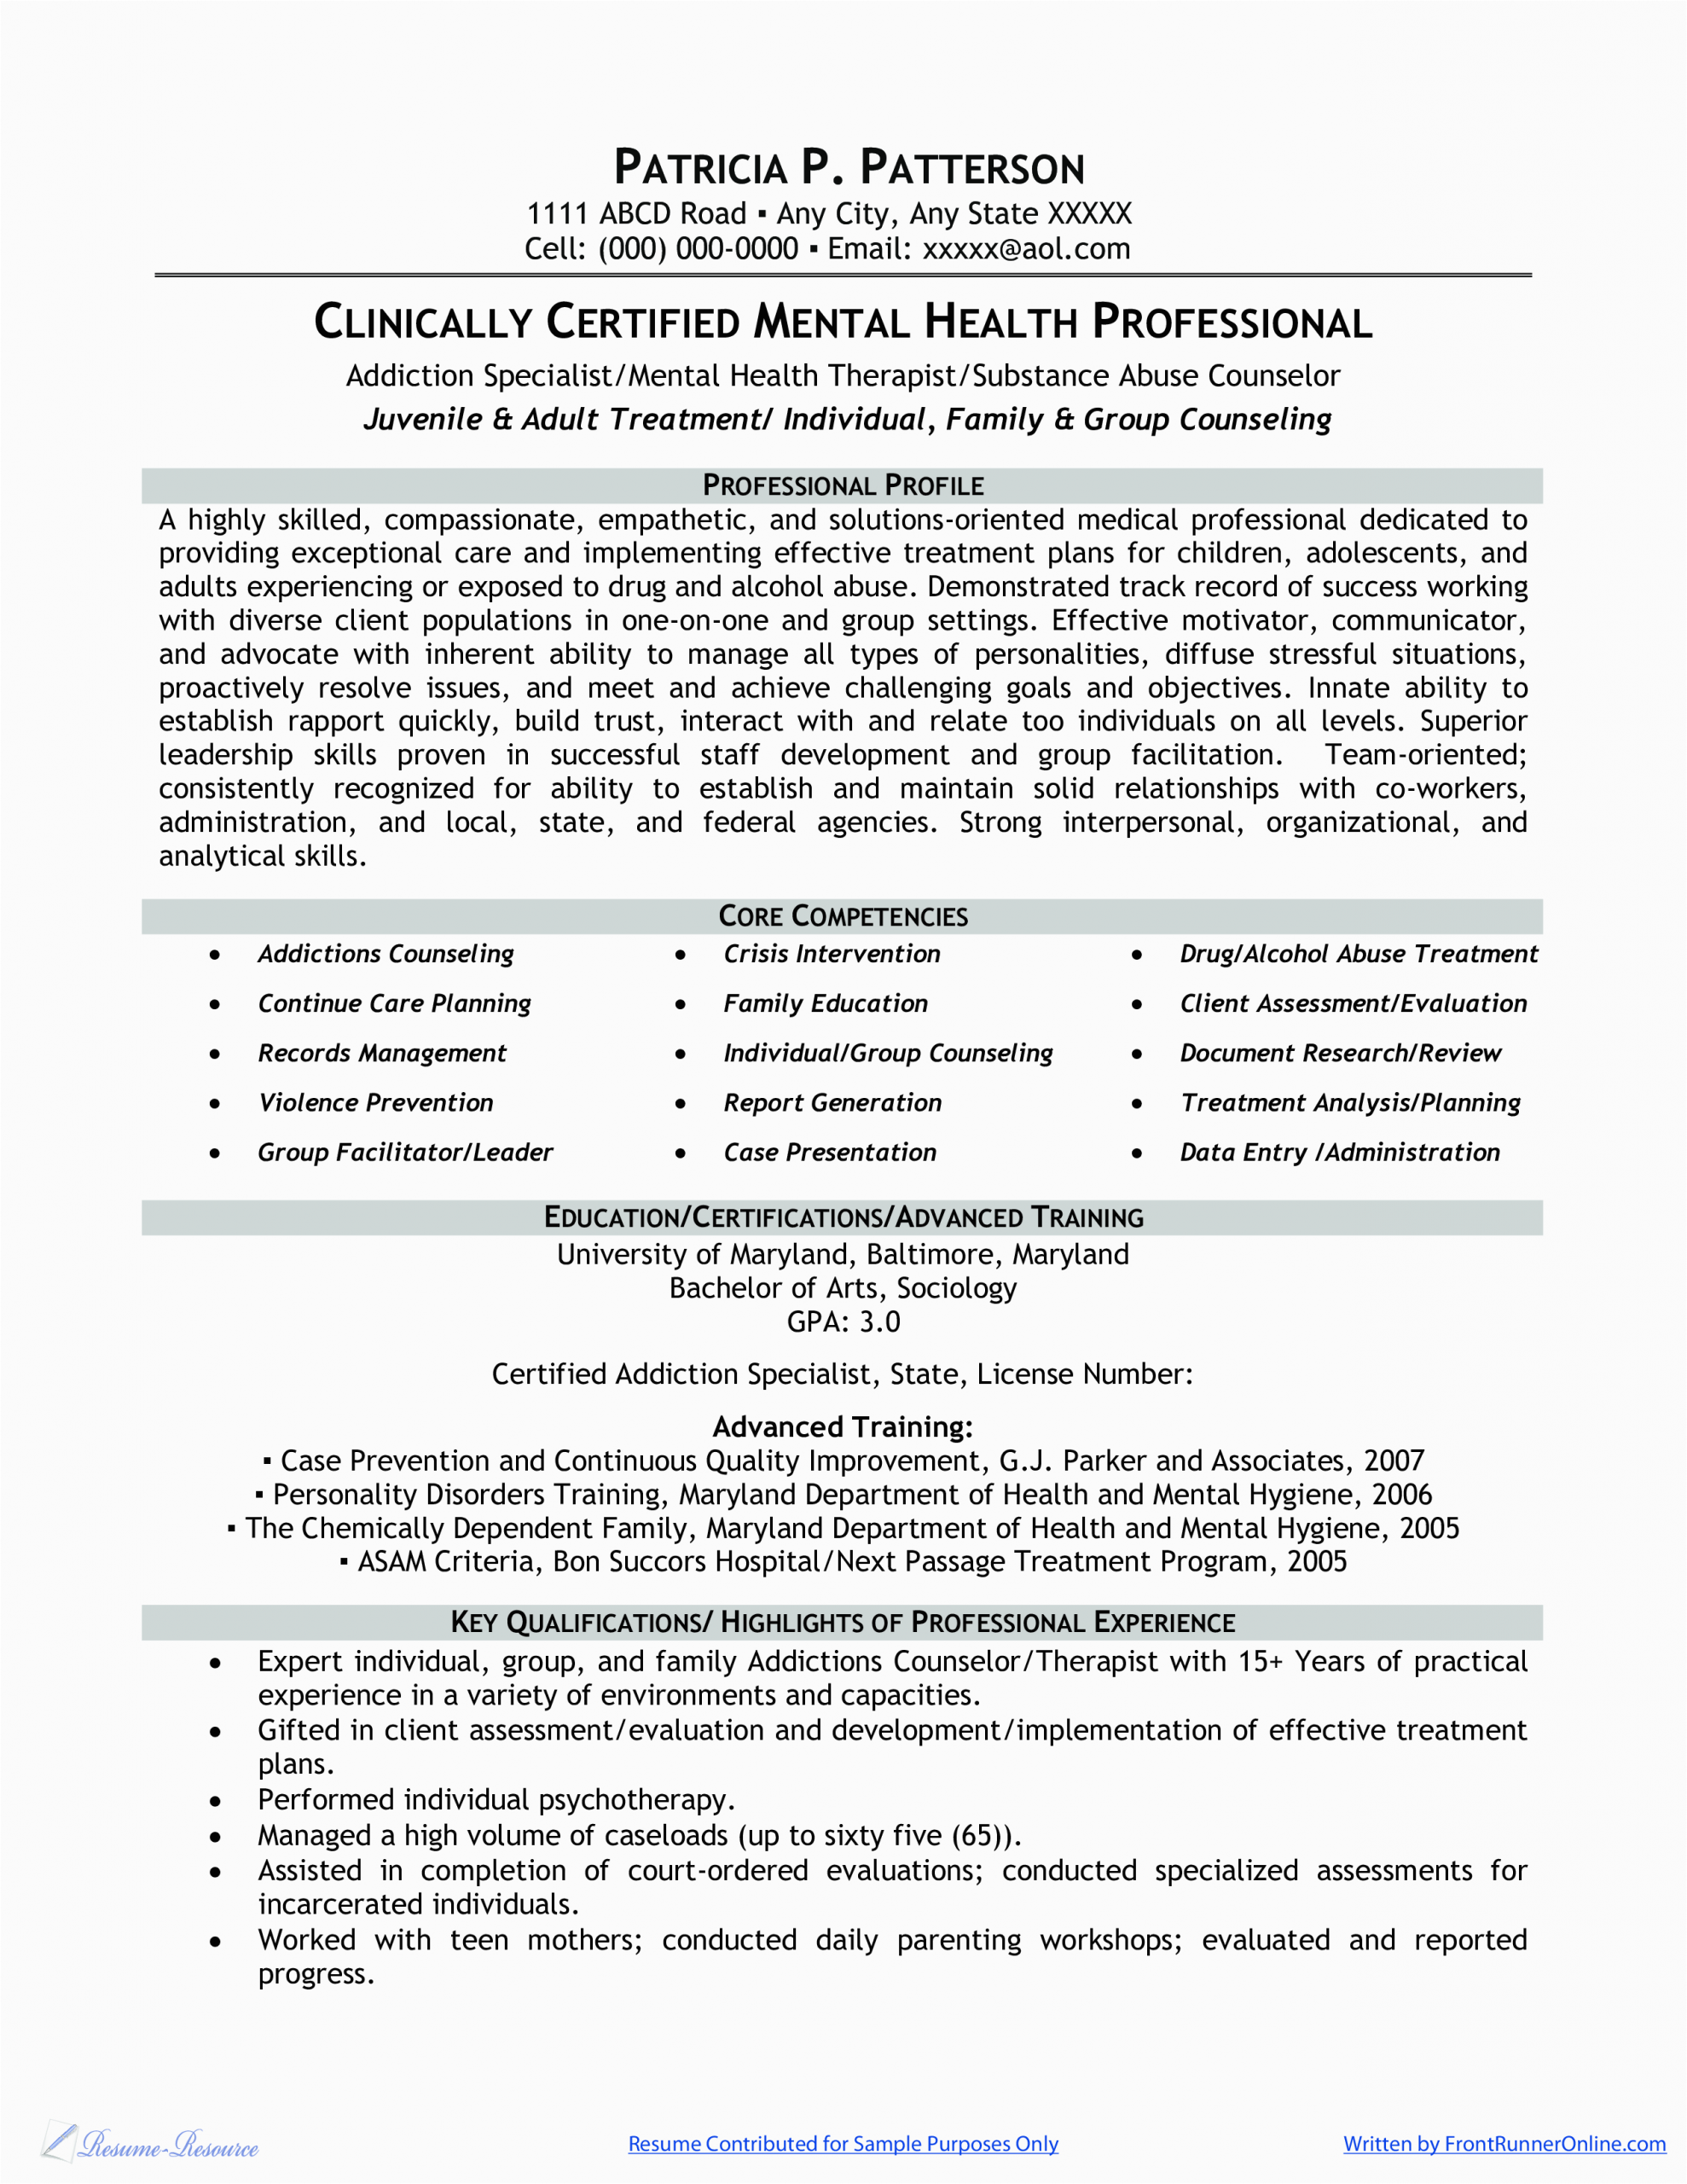 Resume Templates for Mental Health Professionals Free Clinically Certified Mental Health Professional